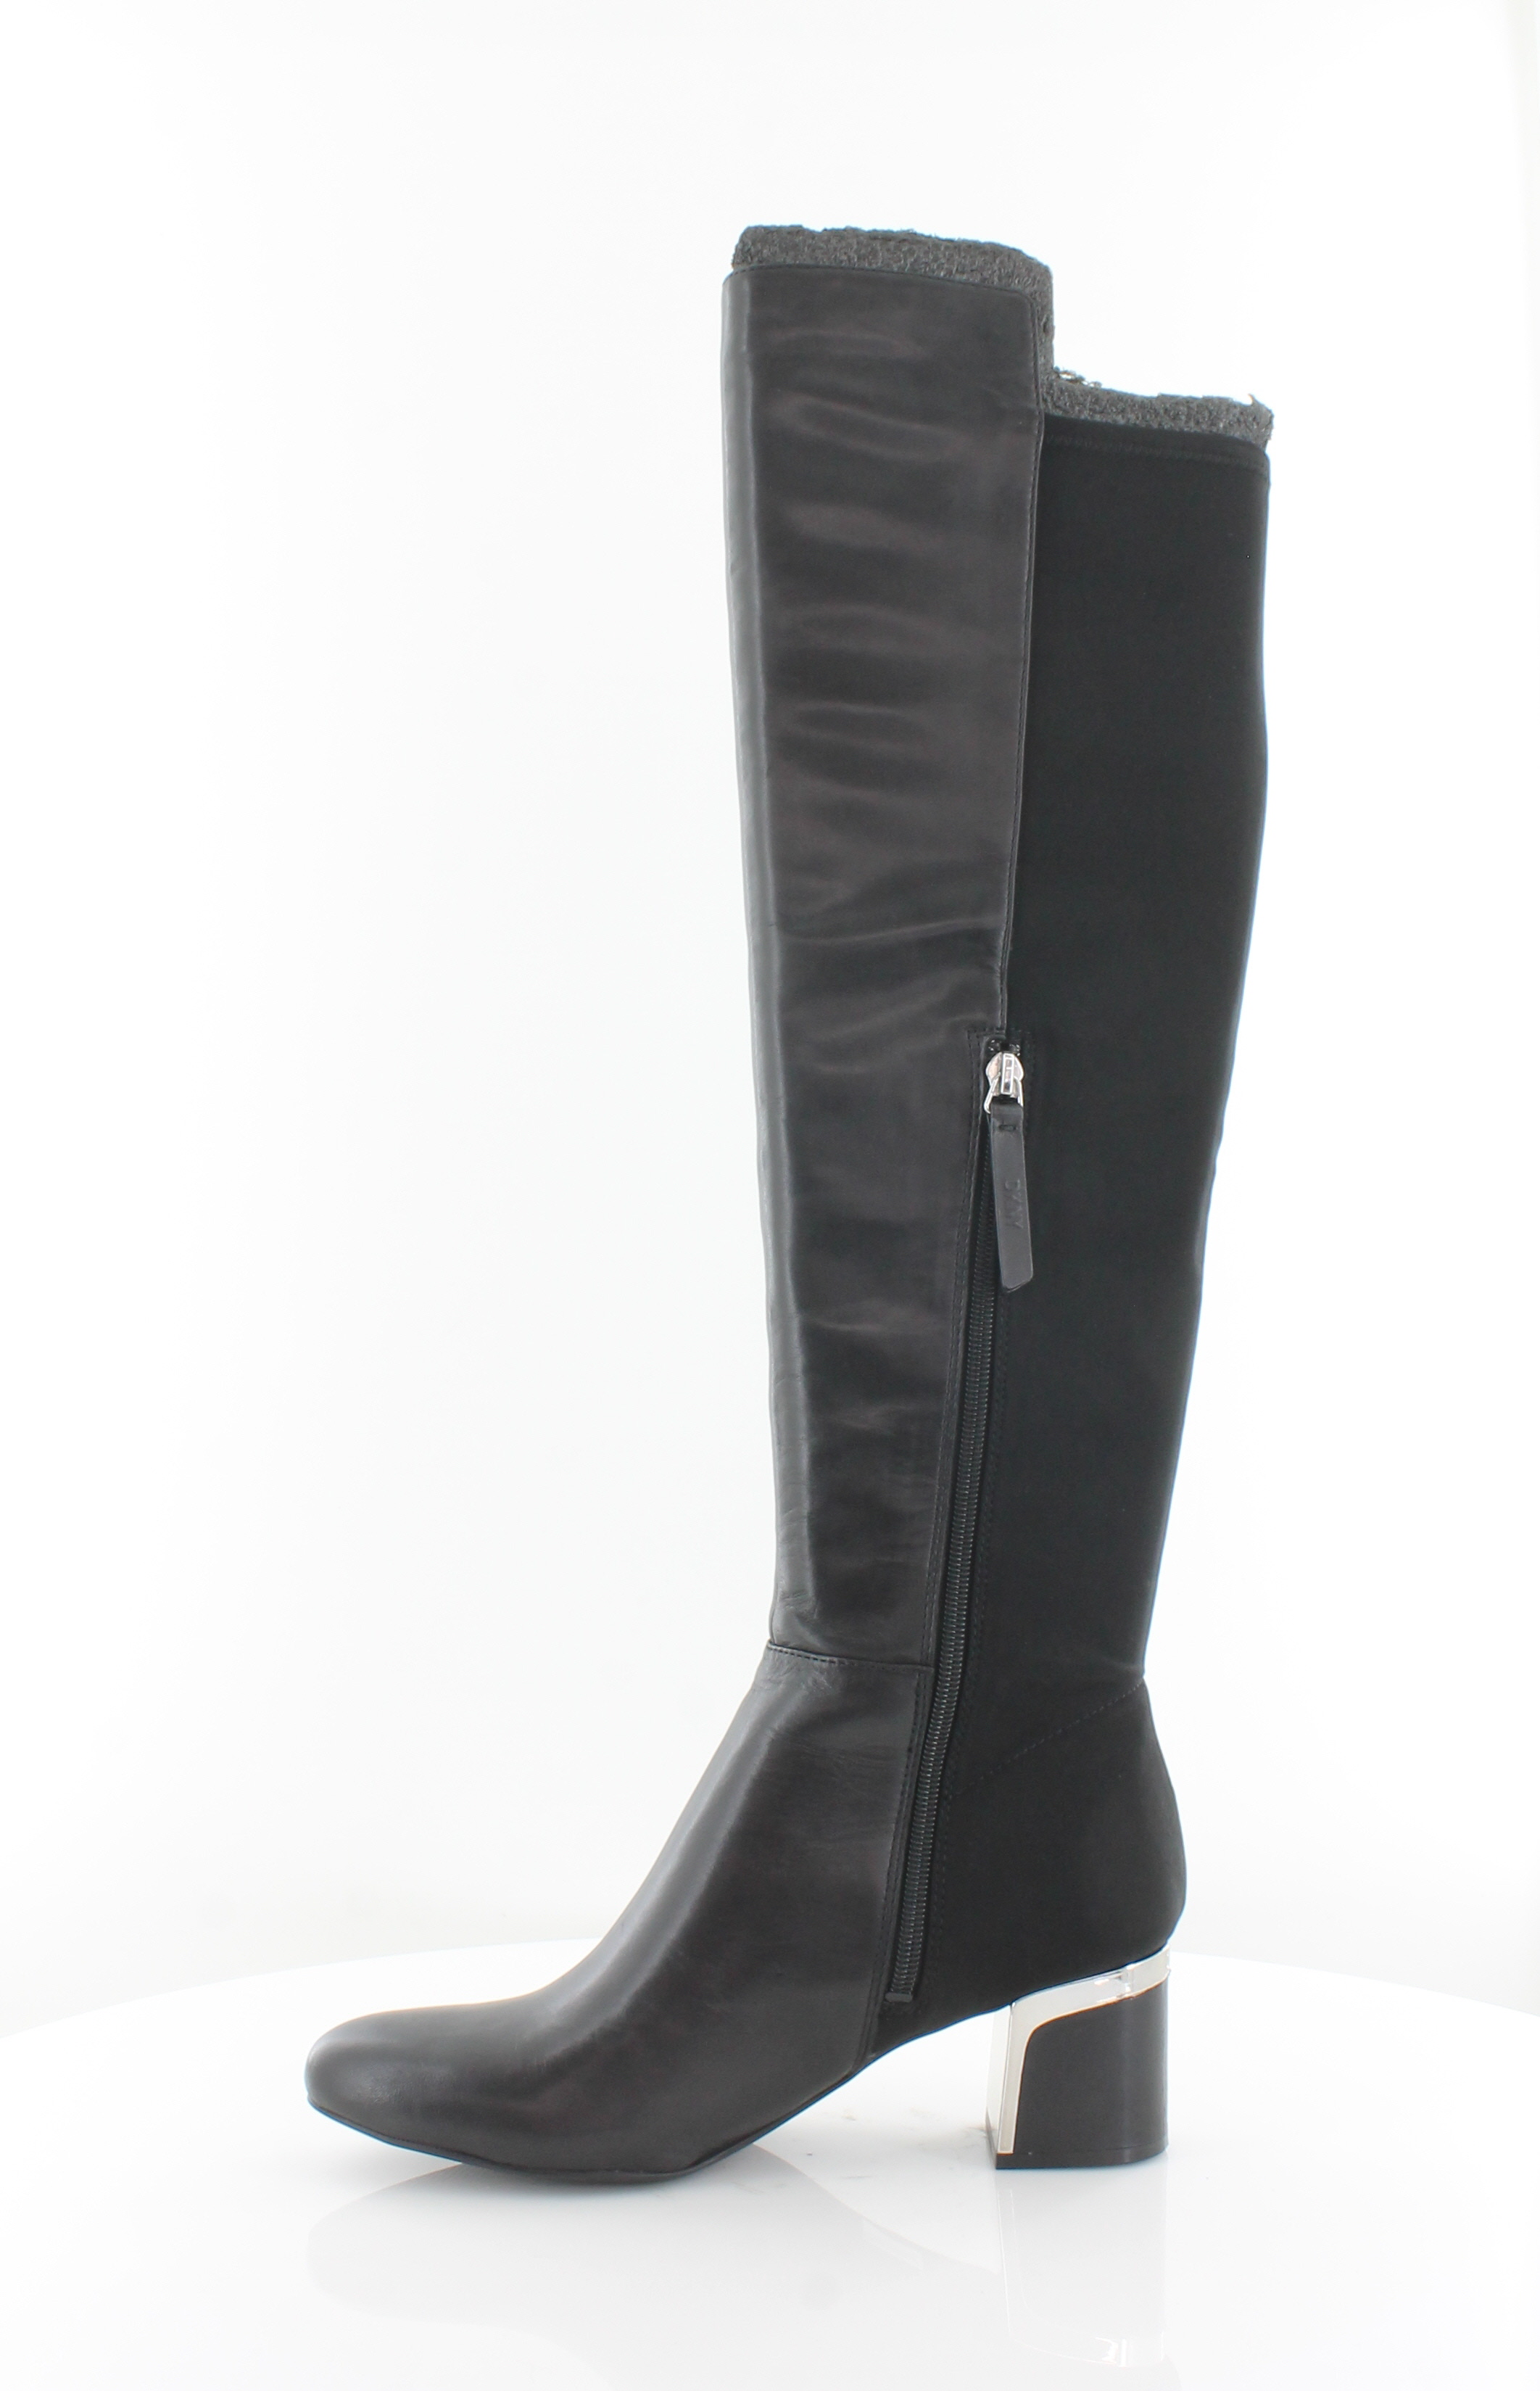 dkny black leather boots